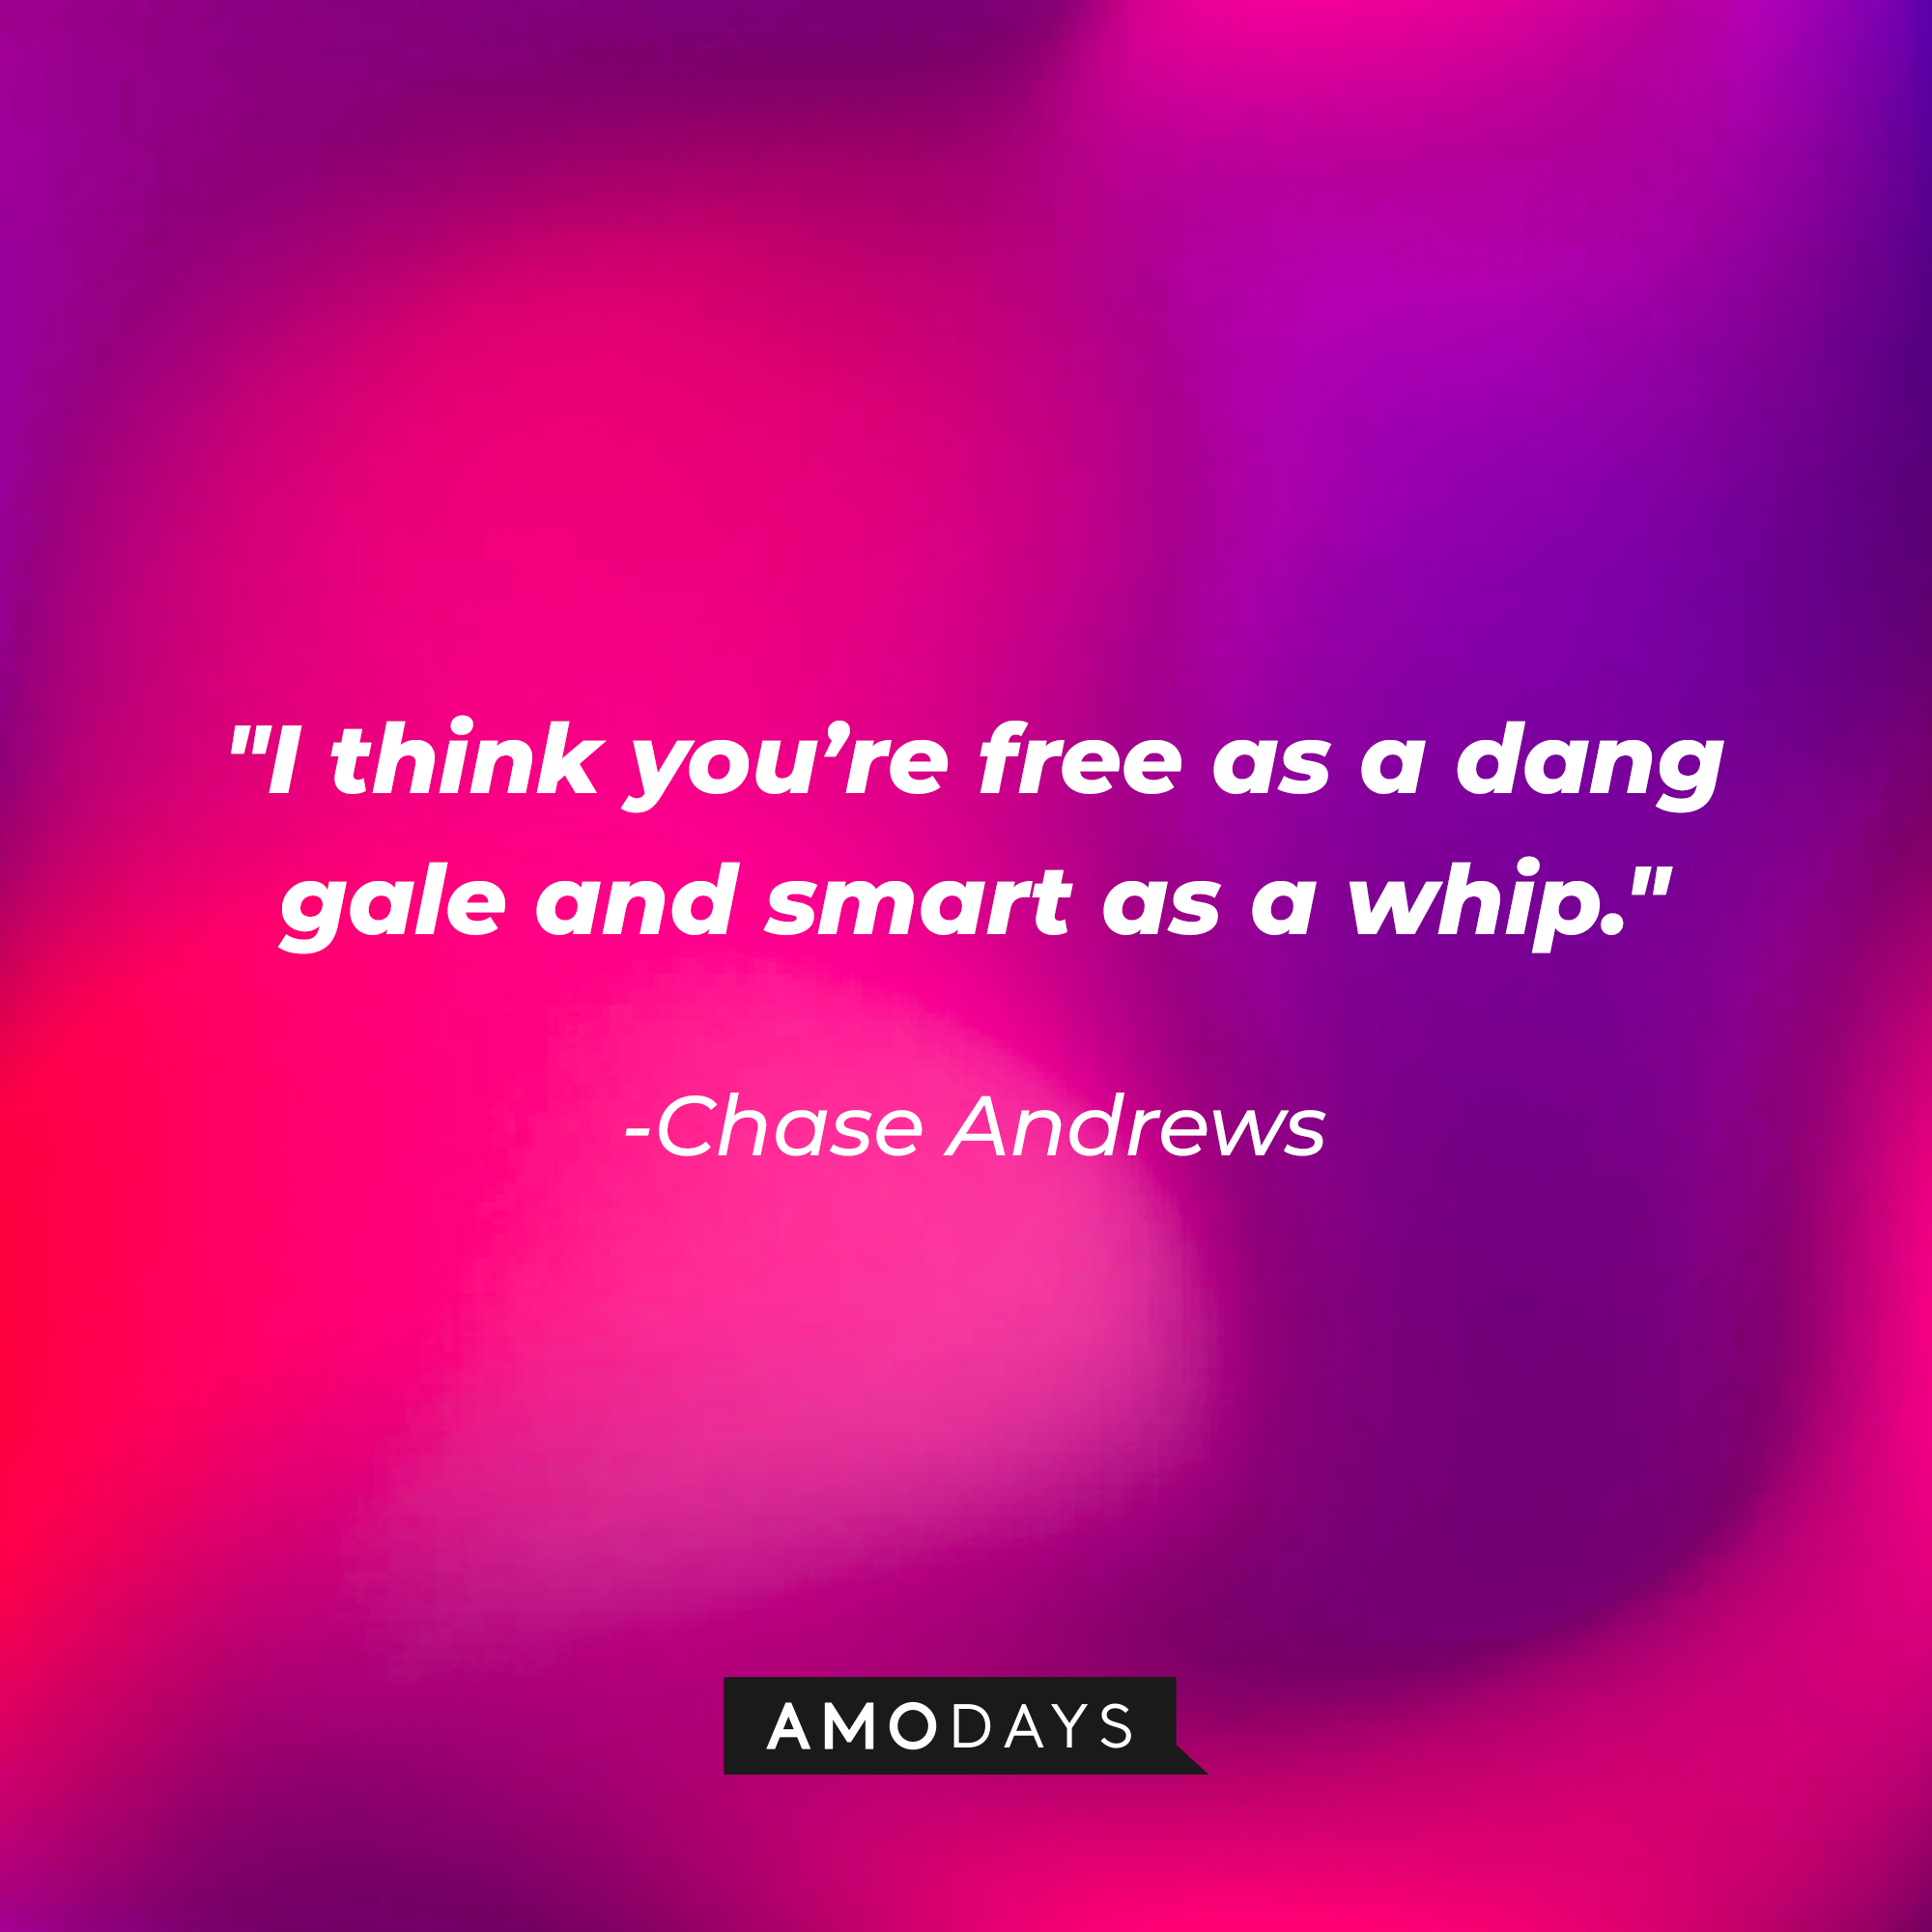 Chase Andrew’s quote: “I think you’re free as a dang gale and smart as a whip.”│Source: AmoDays